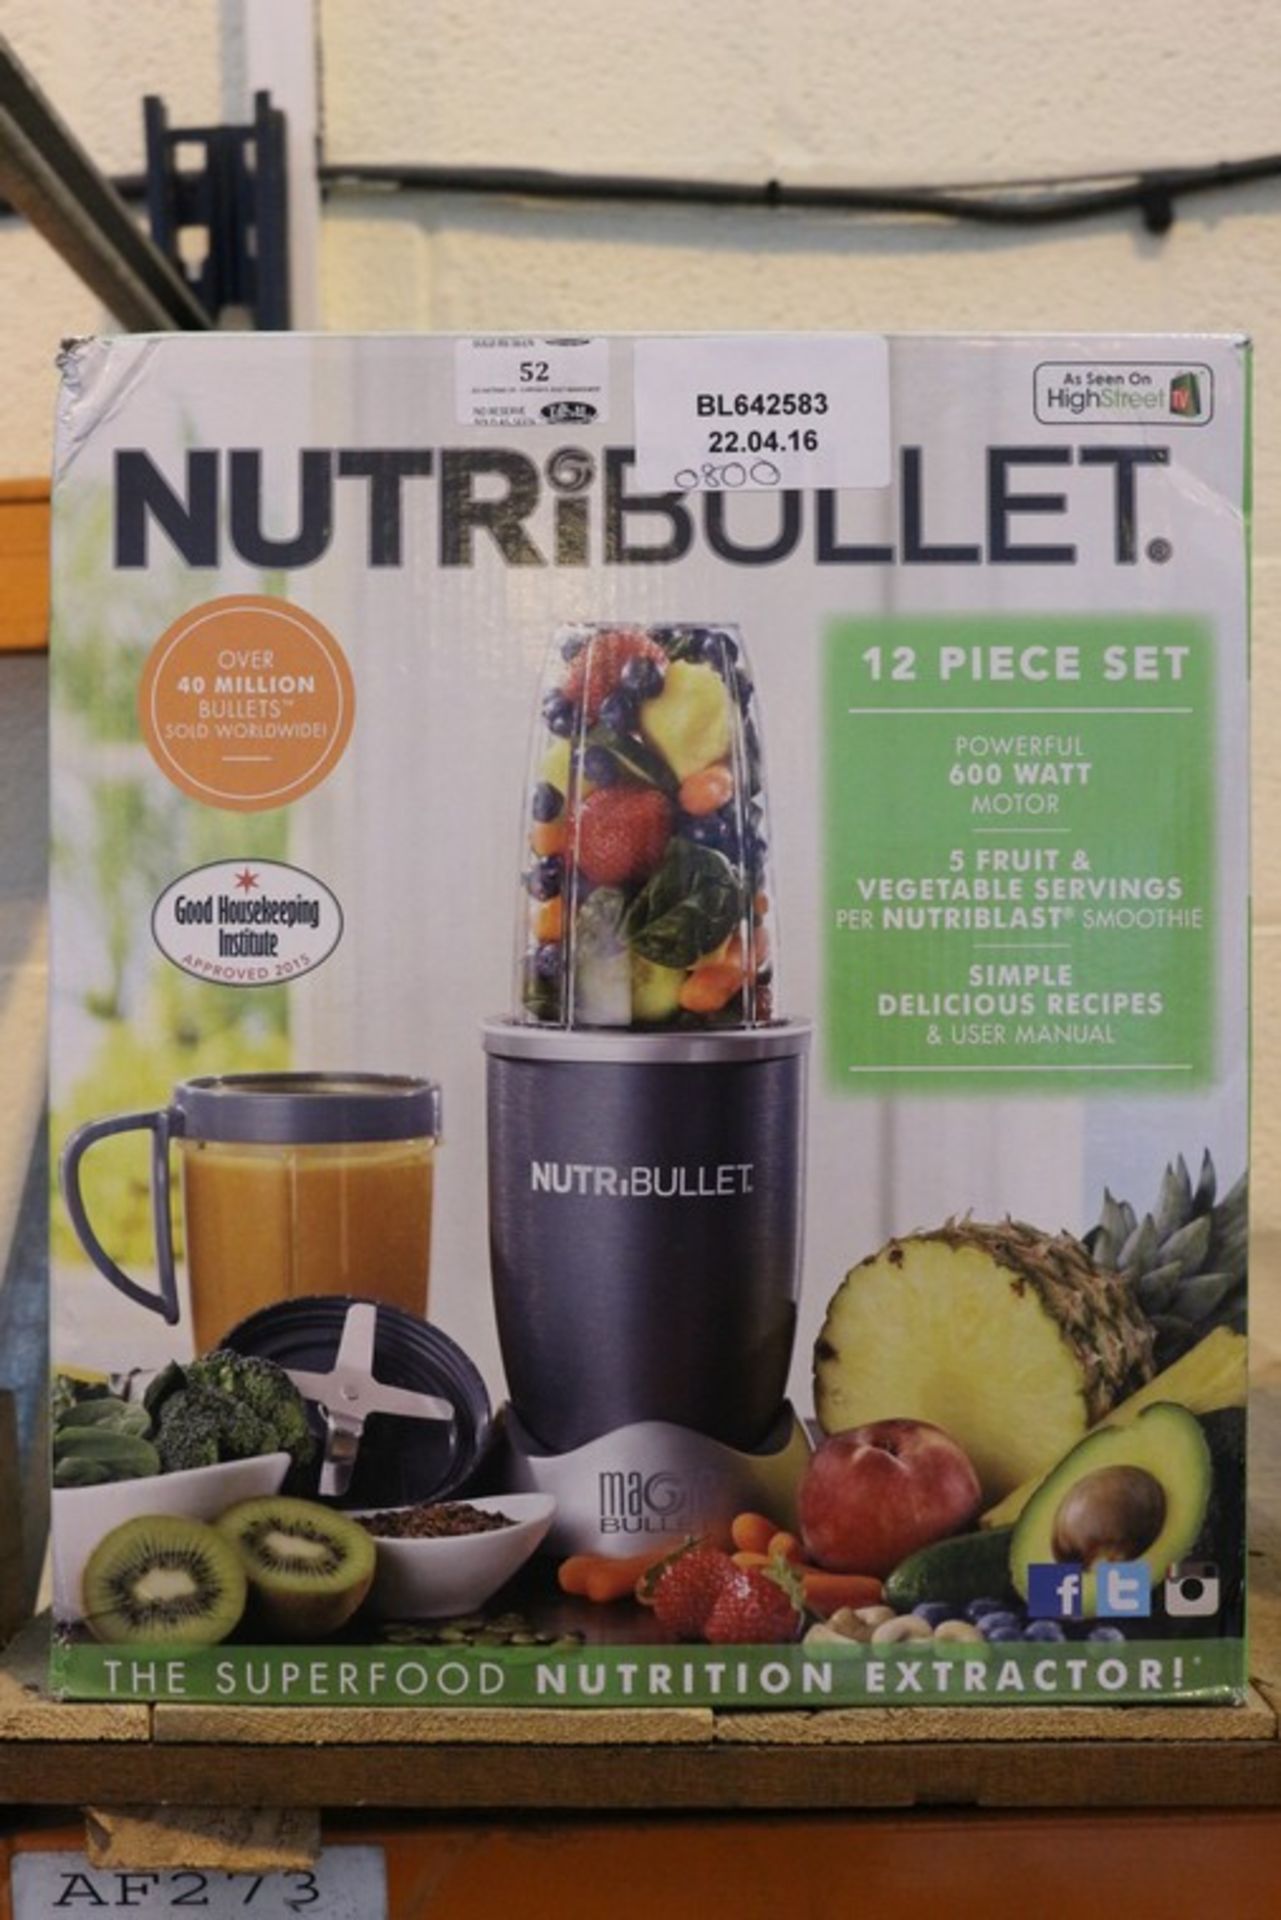 1 x BOXED NUTRI BULLET 12 PIECE SET SUPER FOOD NUTRITION EXTRACTOR RRP £80 (22.4.16) *PLEASE NOTE